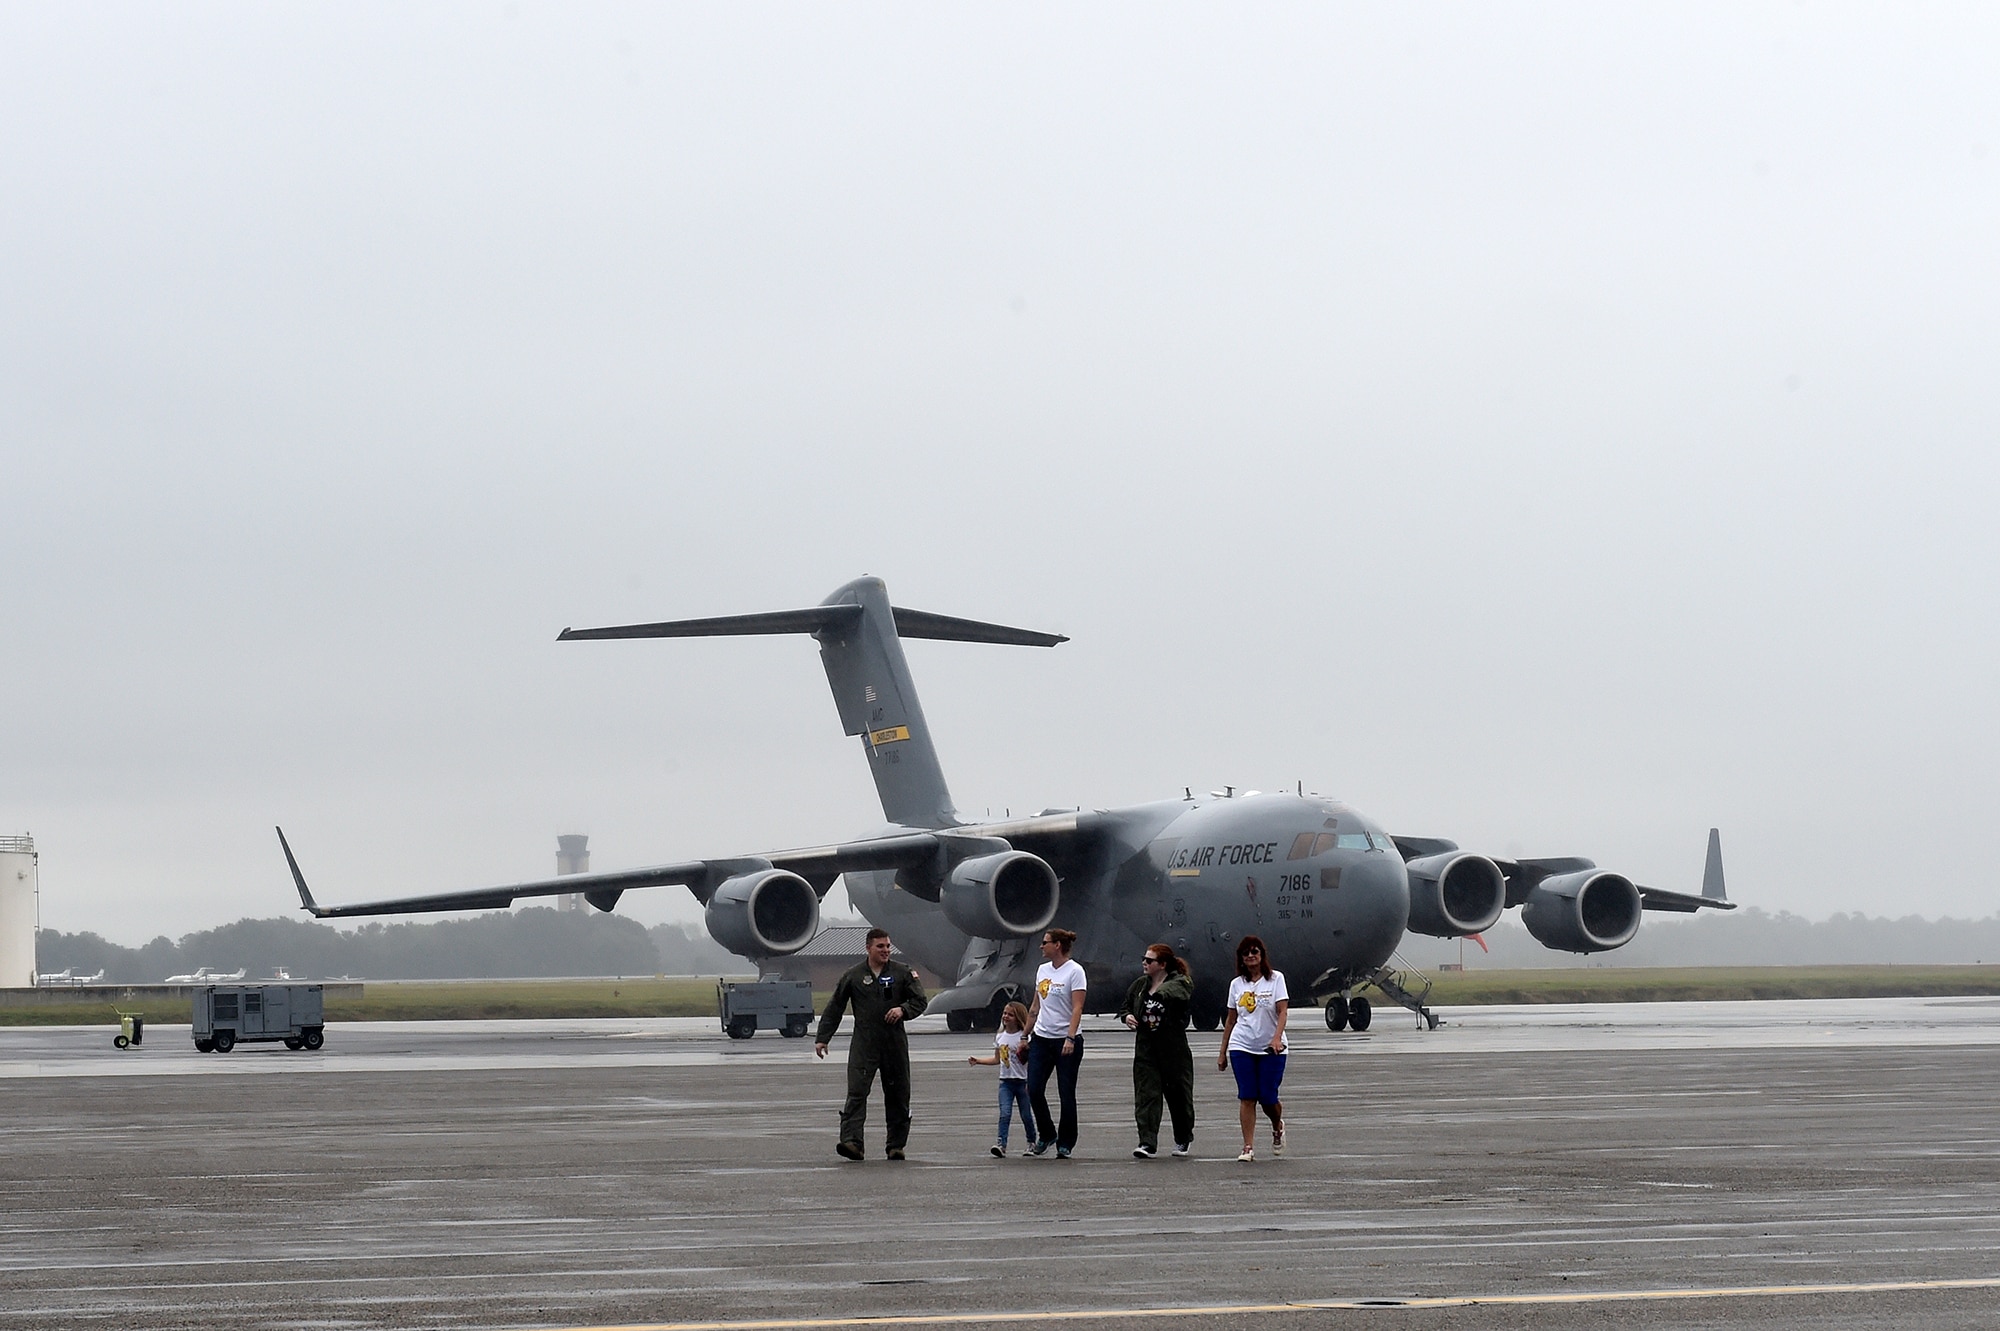 Fallon Emery, second from right, a new honorary member of the 437th Operations Support Squadron, walks on the flight line with 1st Lt. Thad Sollick, left, a C-17 Globemaster III pilot assigned to the 437th OSS, Nov. 7, 2018, after touring a C-17 at Joint Base Charleston, S.C., as part of the Airman for a Day program.